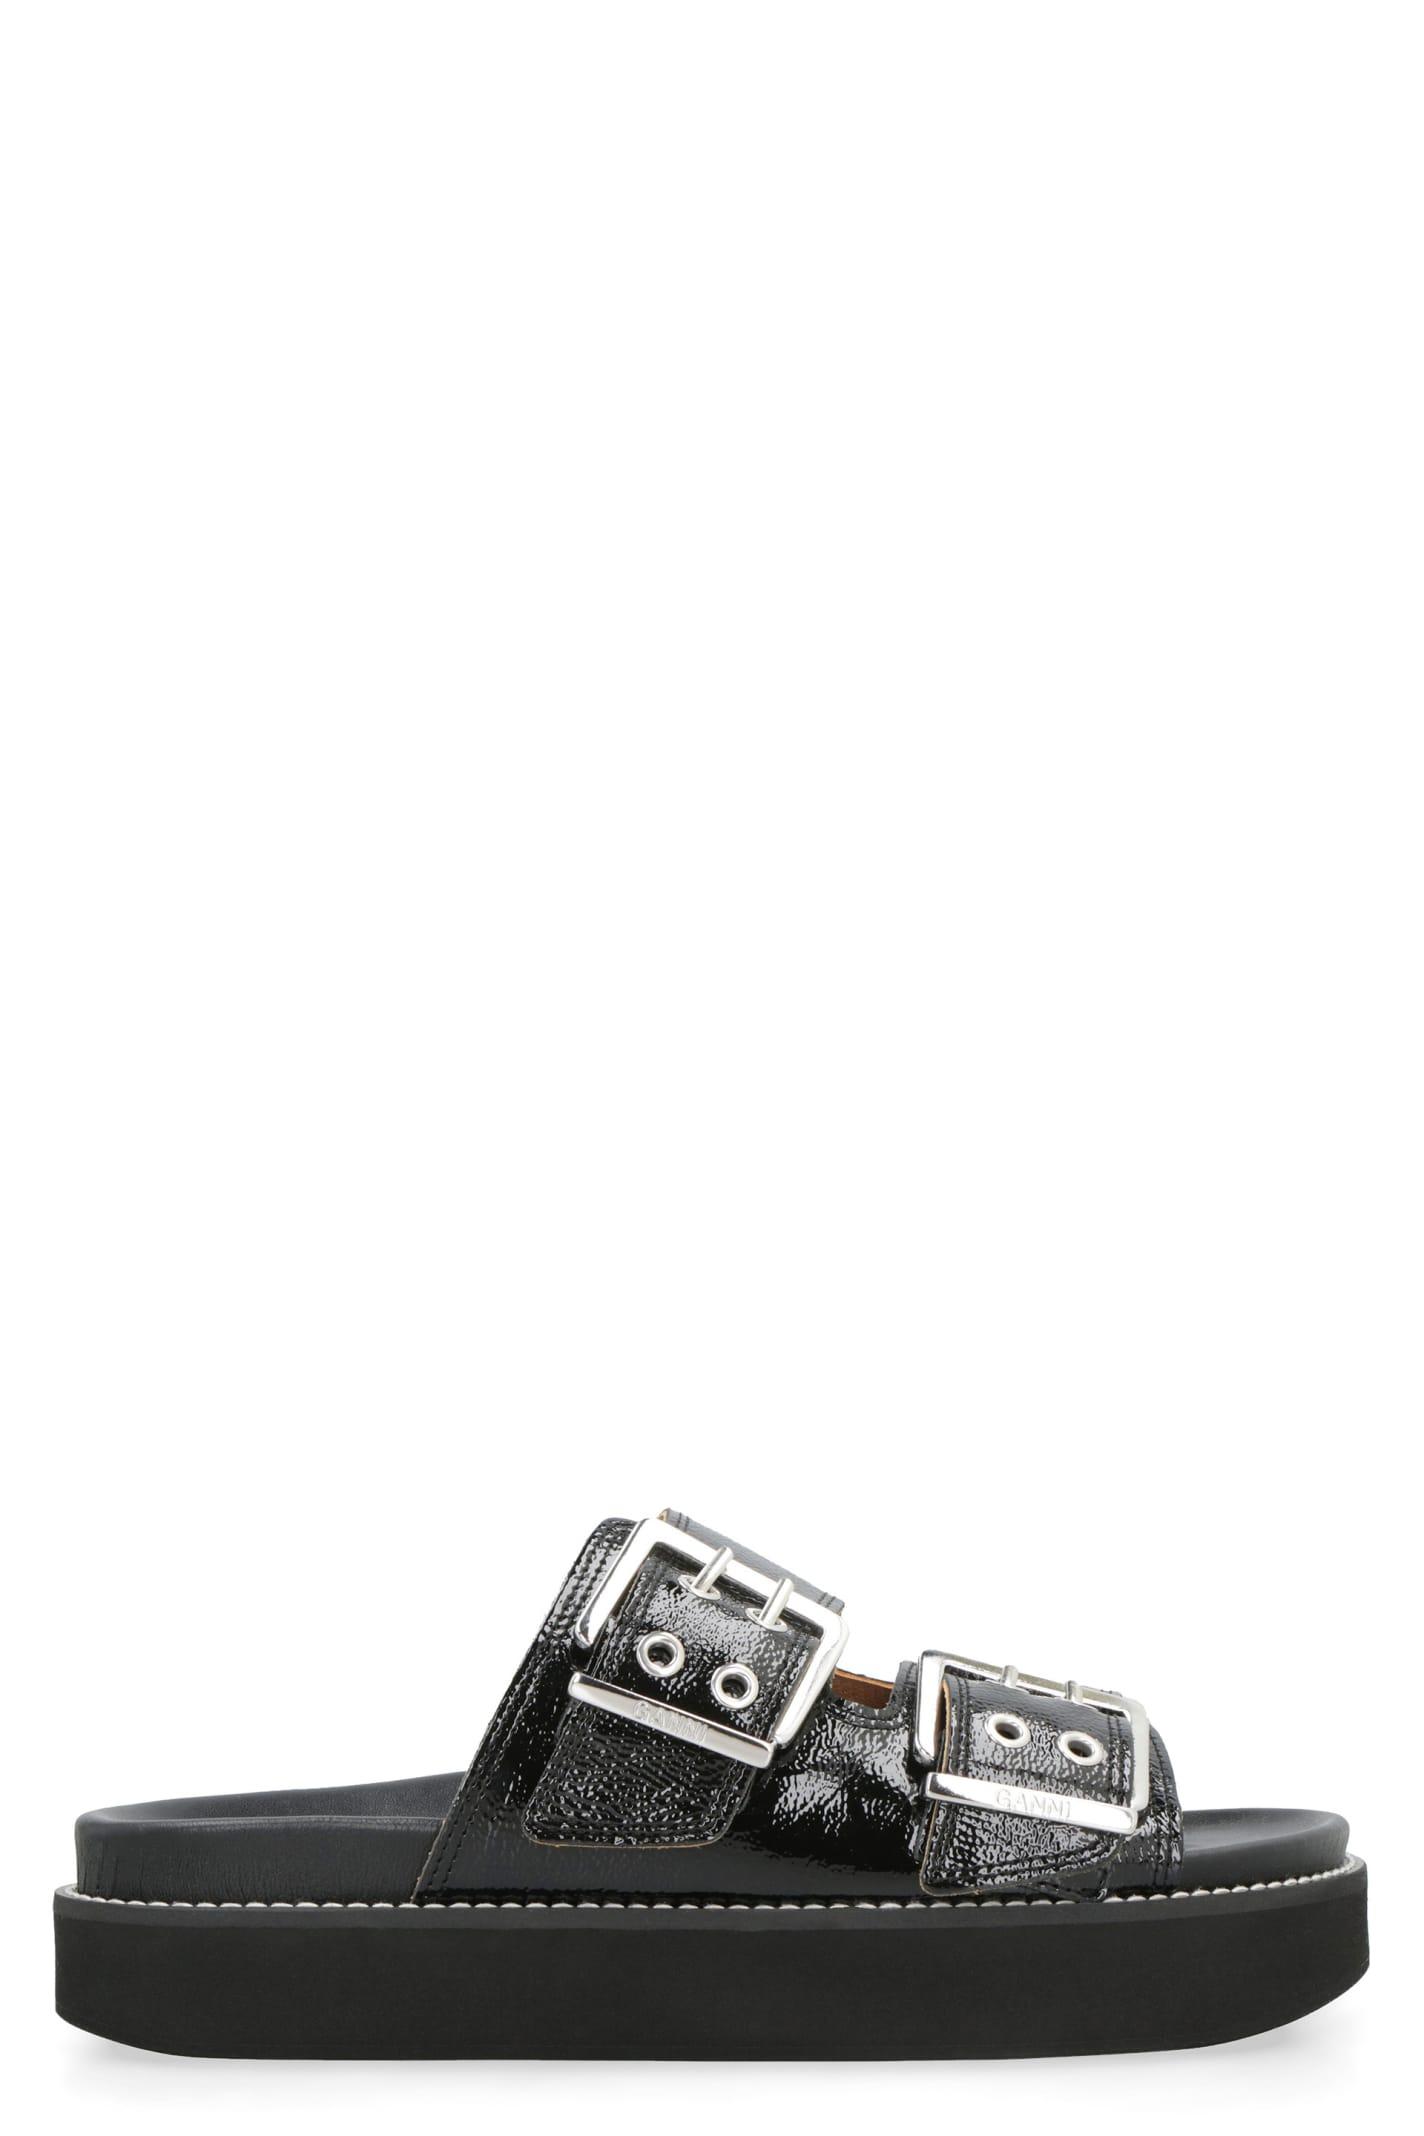 Ganni Leather Slides With Buckle in Black | Lyst